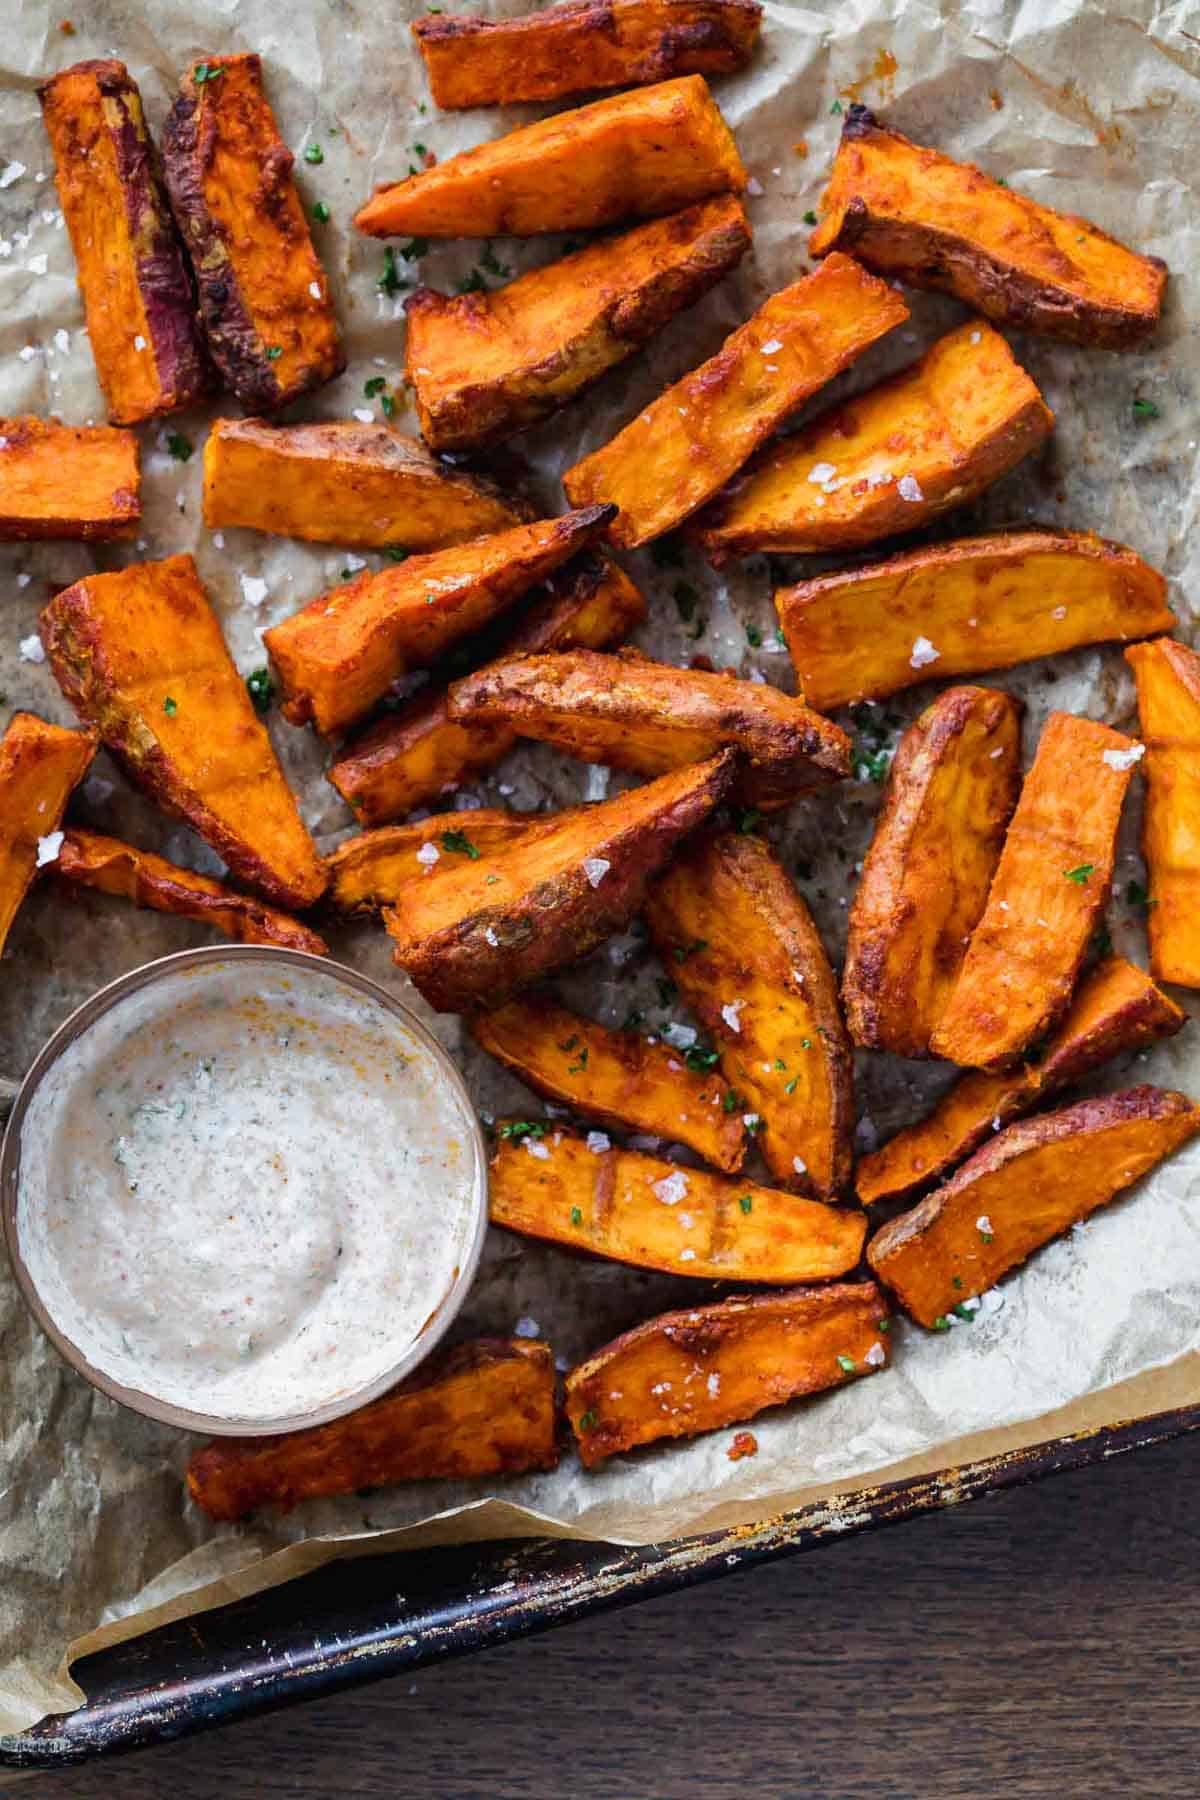 Chilli Lime Sweet Potato Wedges baked and served on a tray with a dipping sauce